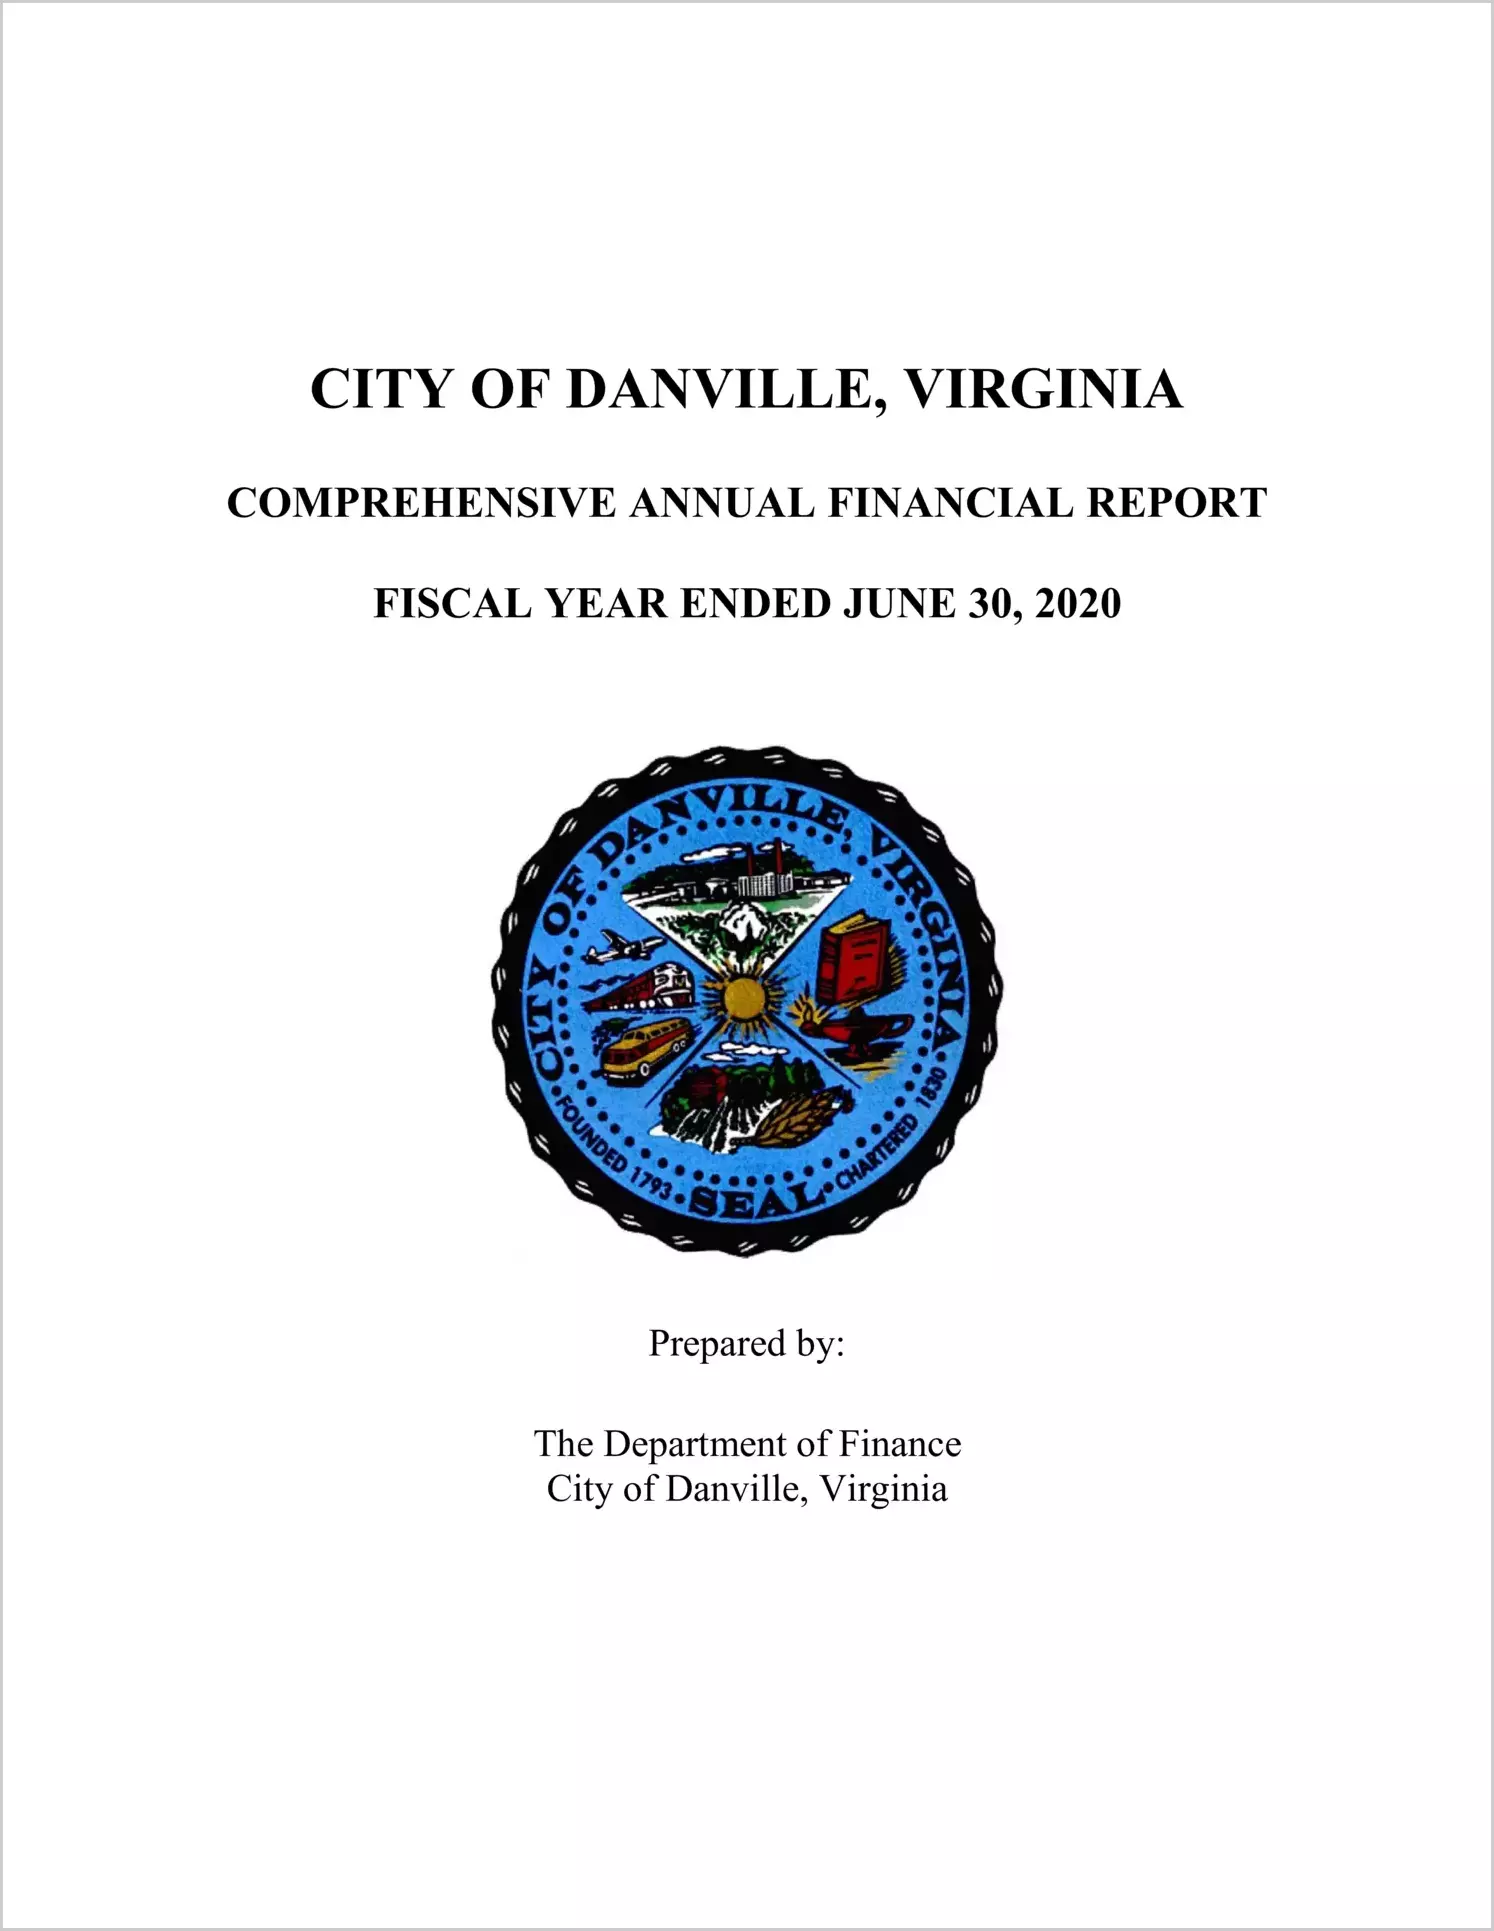 2020 Annual Financial Report for City of Danville